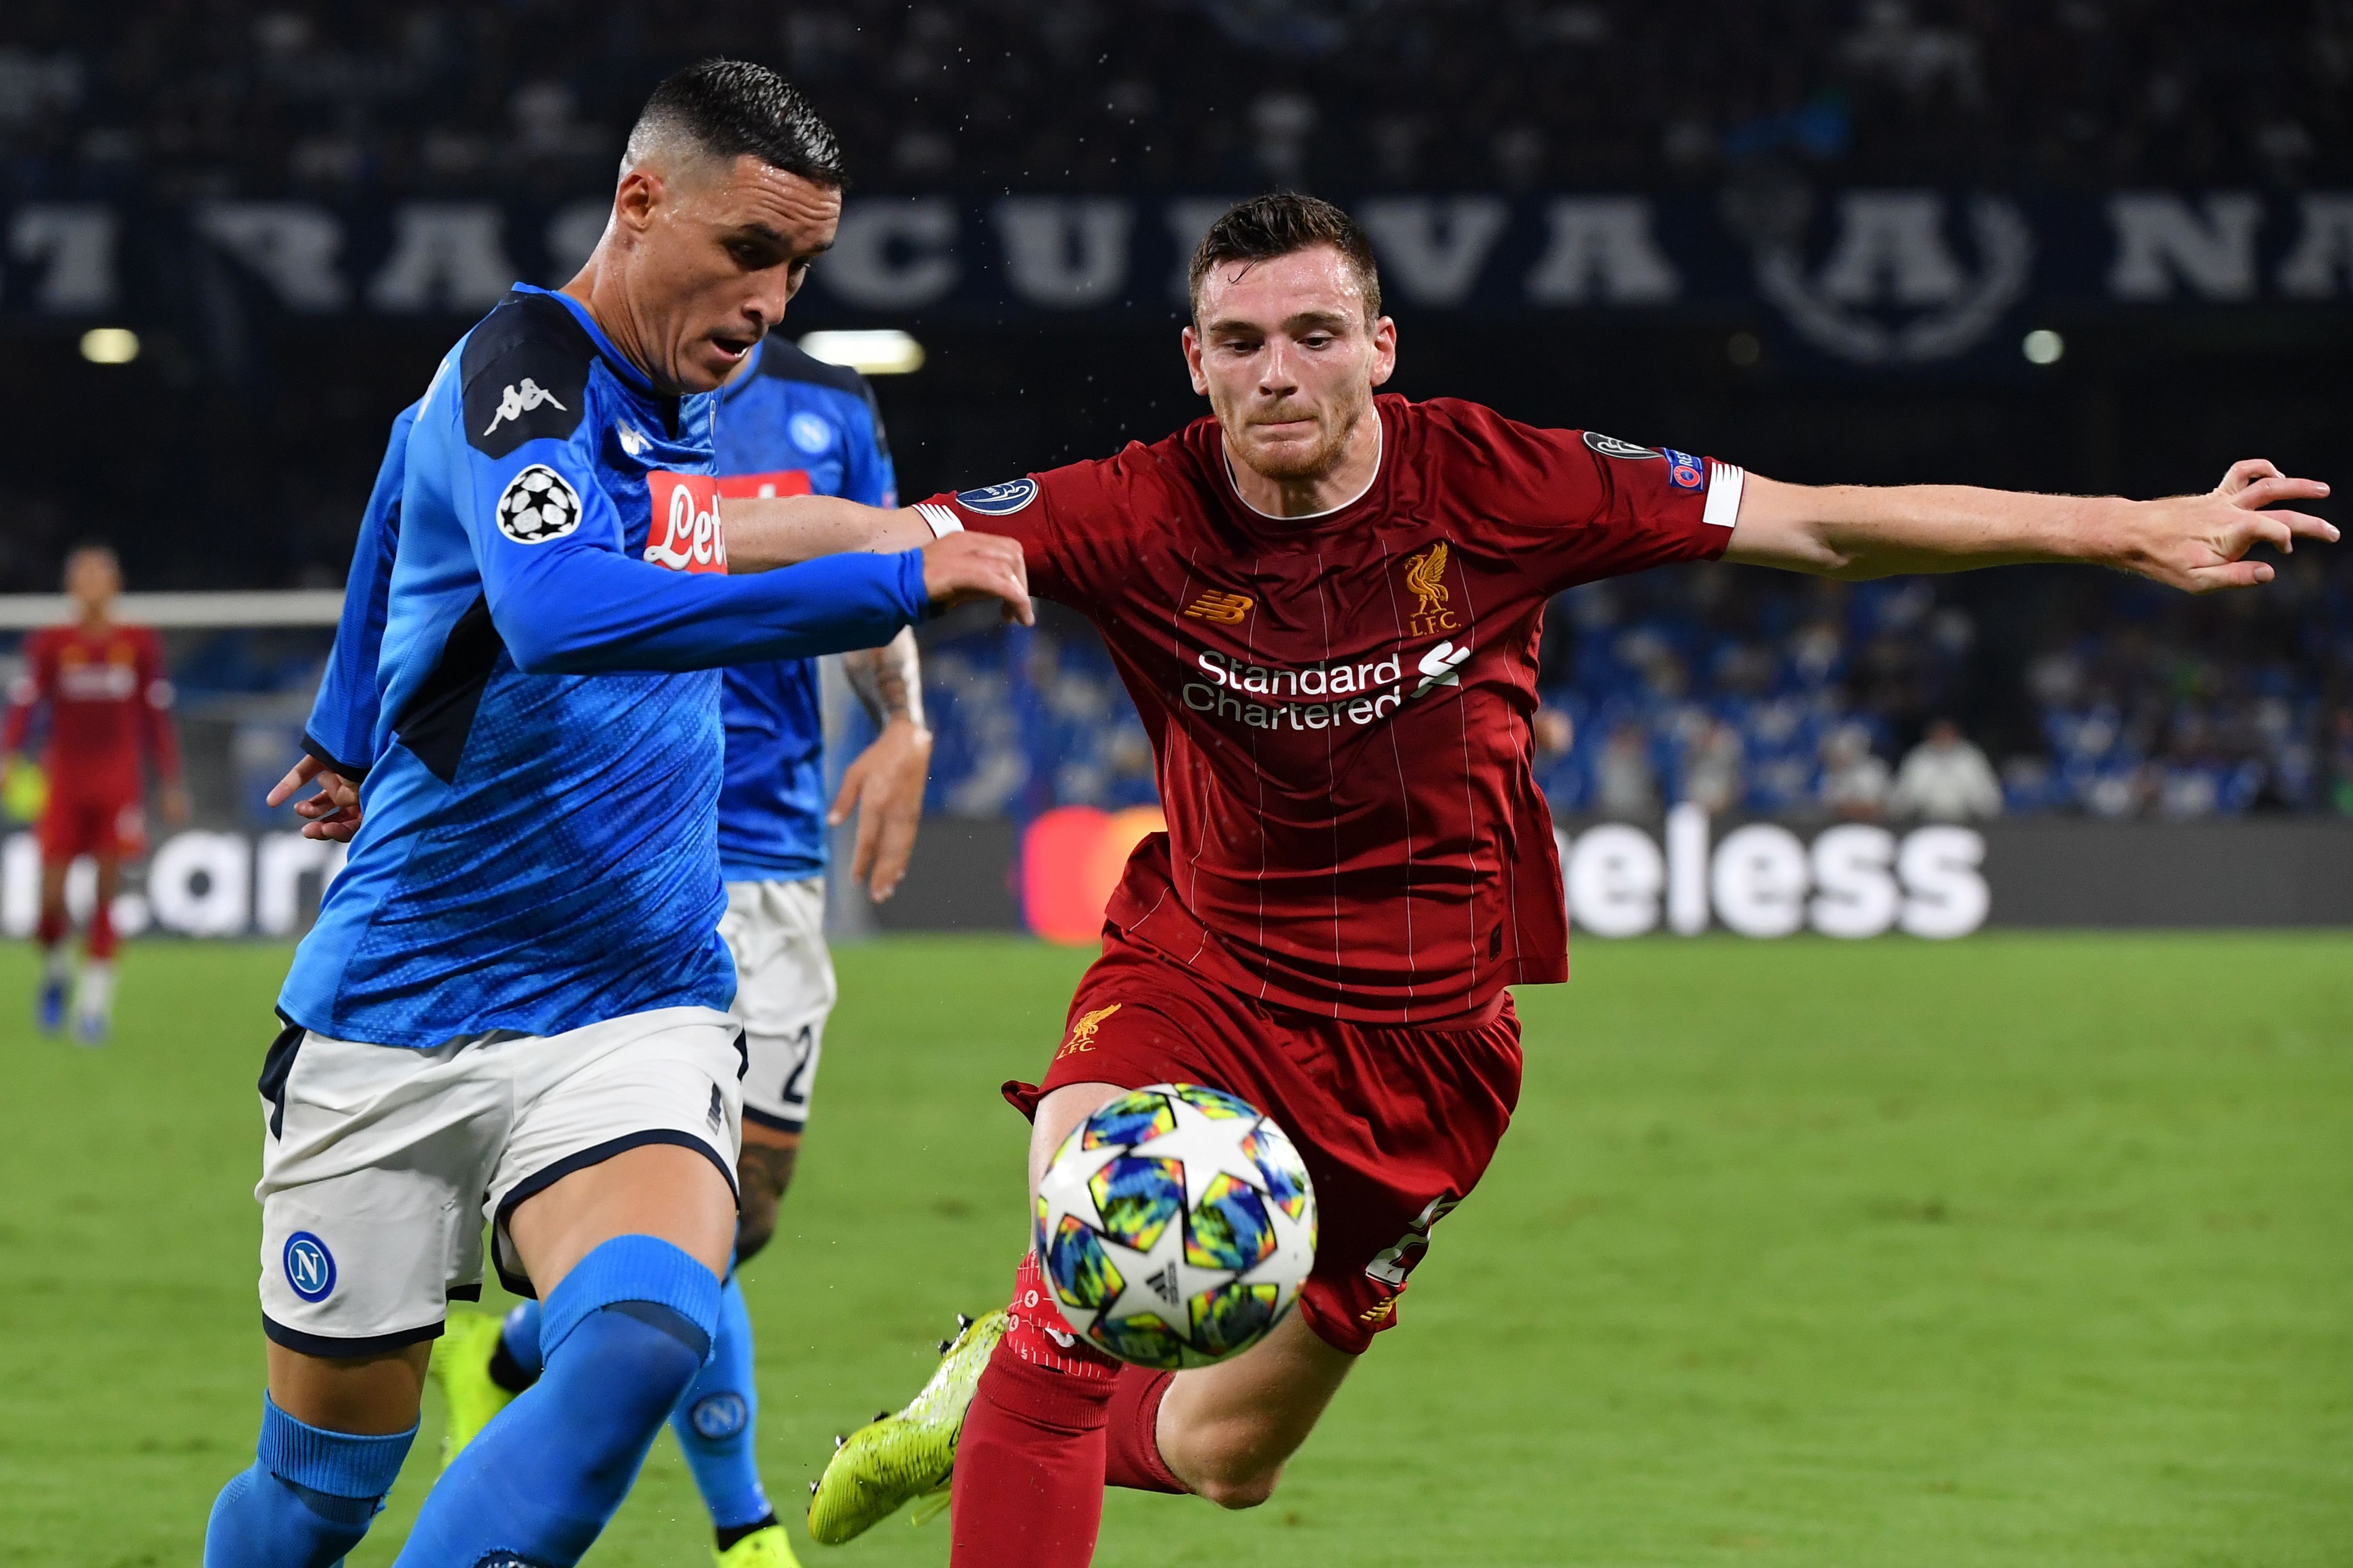 Napoli's Spanish forward Jose Callejon (L) challenges Liverpool's Scottish defender Andrew Robertson during the UEFA Champions League Group E football match Napoli vs Liverpool on September 17, 2019 at the San Paolo stadium in Naples.